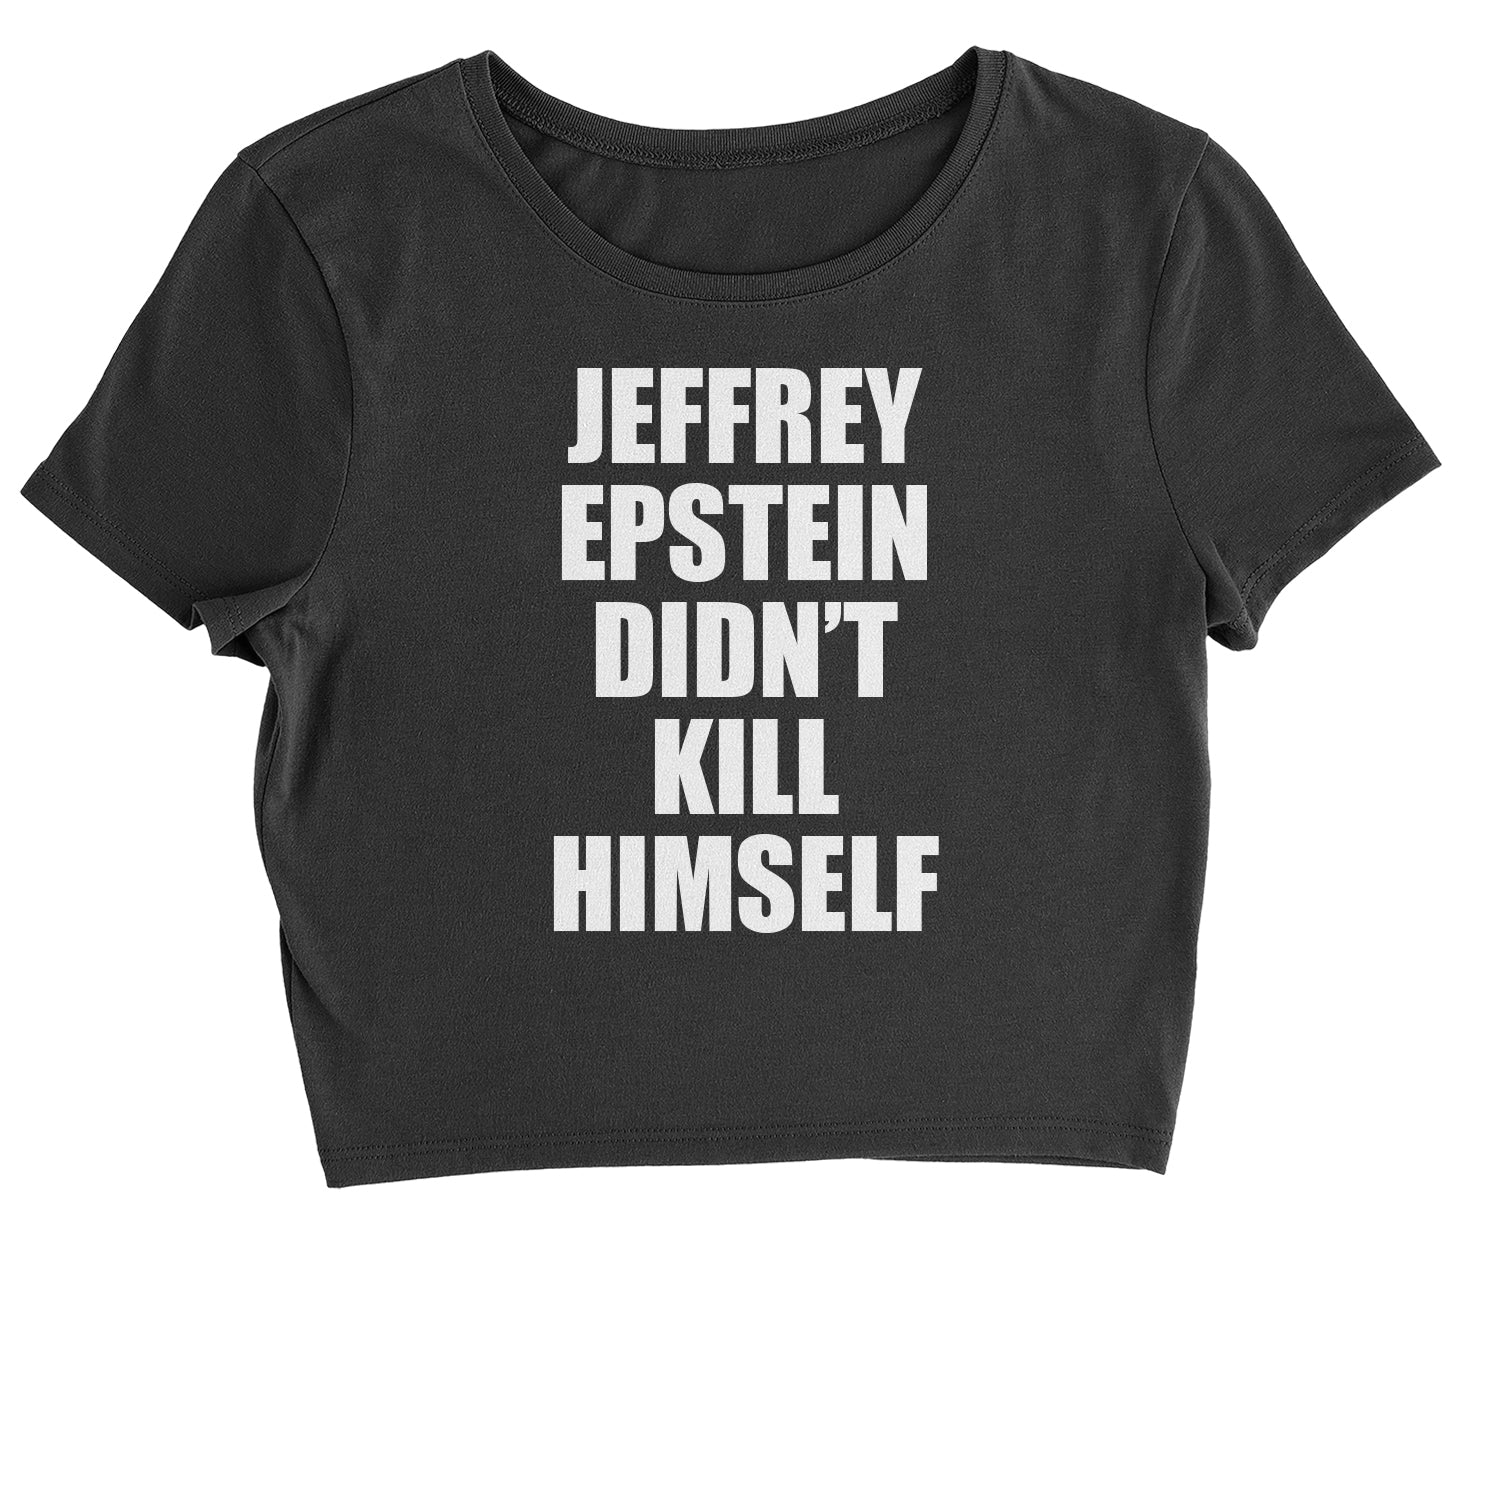 Jeffrey Epstein Didn't Kill Himself Cropped T-Shirt coverup, homicide, murder, ssadgk, trump by Expression Tees